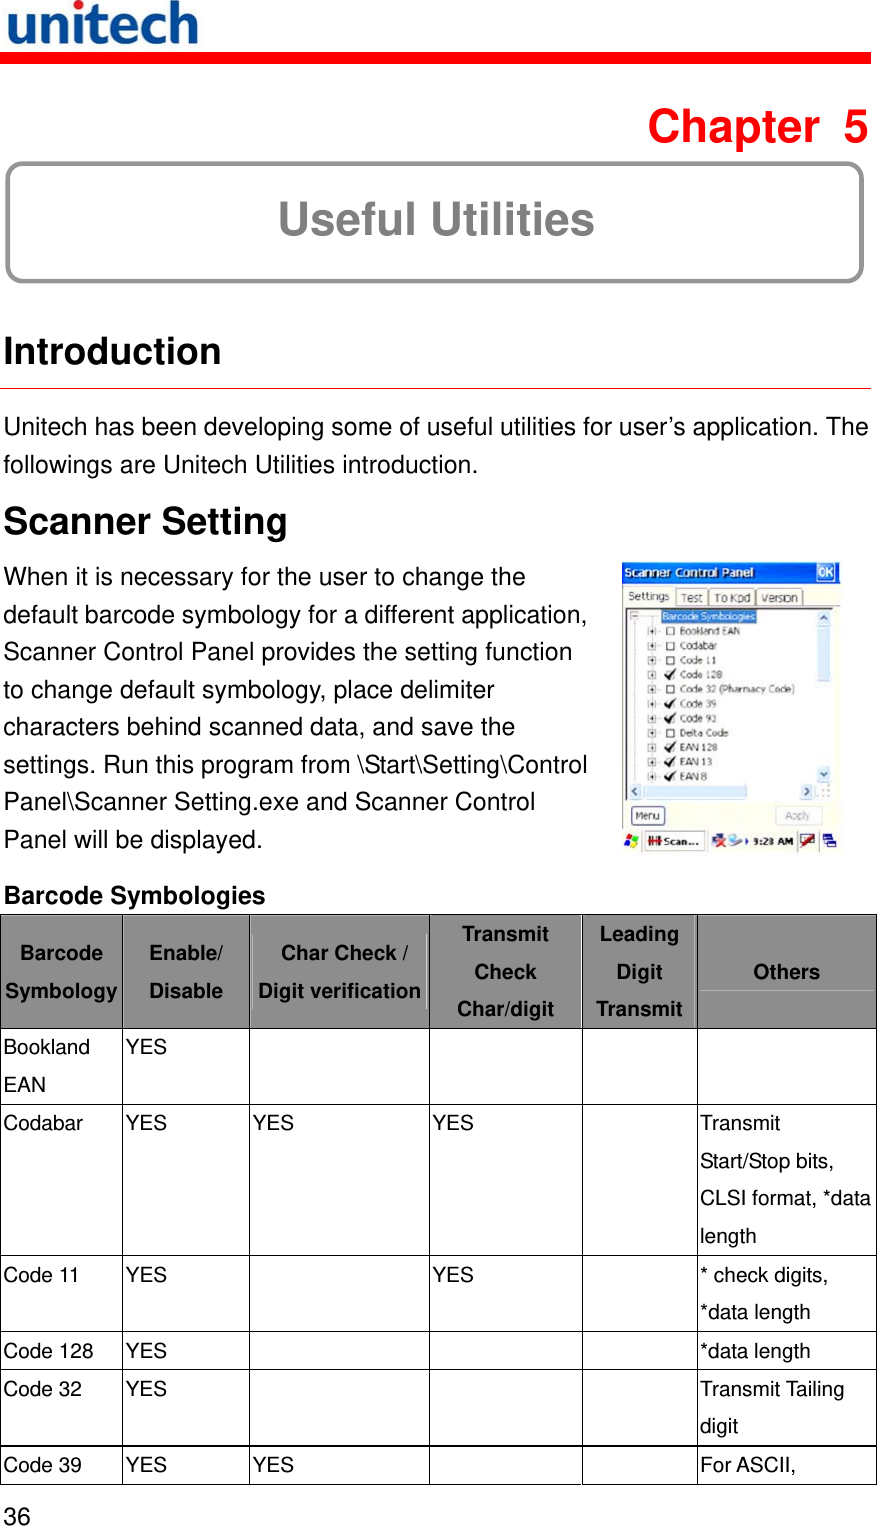   36  Chapter 5  Useful Utilities  Introduction Unitech has been developing some of useful utilities for user’s application. The followings are Unitech Utilities introduction. Scanner Setting When it is necessary for the user to change the default barcode symbology for a different application, Scanner Control Panel provides the setting function to change default symbology, place delimiter characters behind scanned data, and save the settings. Run this program from \Start\Setting\Control Panel\Scanner Setting.exe and Scanner Control Panel will be displayed.   Barcode Symbologies Barcode Symbology Enable/ Disable   Char Check / Digit verificationTransmit Check Char/digit Leading Digit TransmitOthers Bookland EAN YES        Codabar YES  YES  YES    Transmit Start/Stop bits, CLSI format, *data length Code 11  YES    YES    * check digits, *data length Code 128  YES        *data length Code 32  YES        Transmit Tailing digit Code 39  YES  YES      For ASCII, 